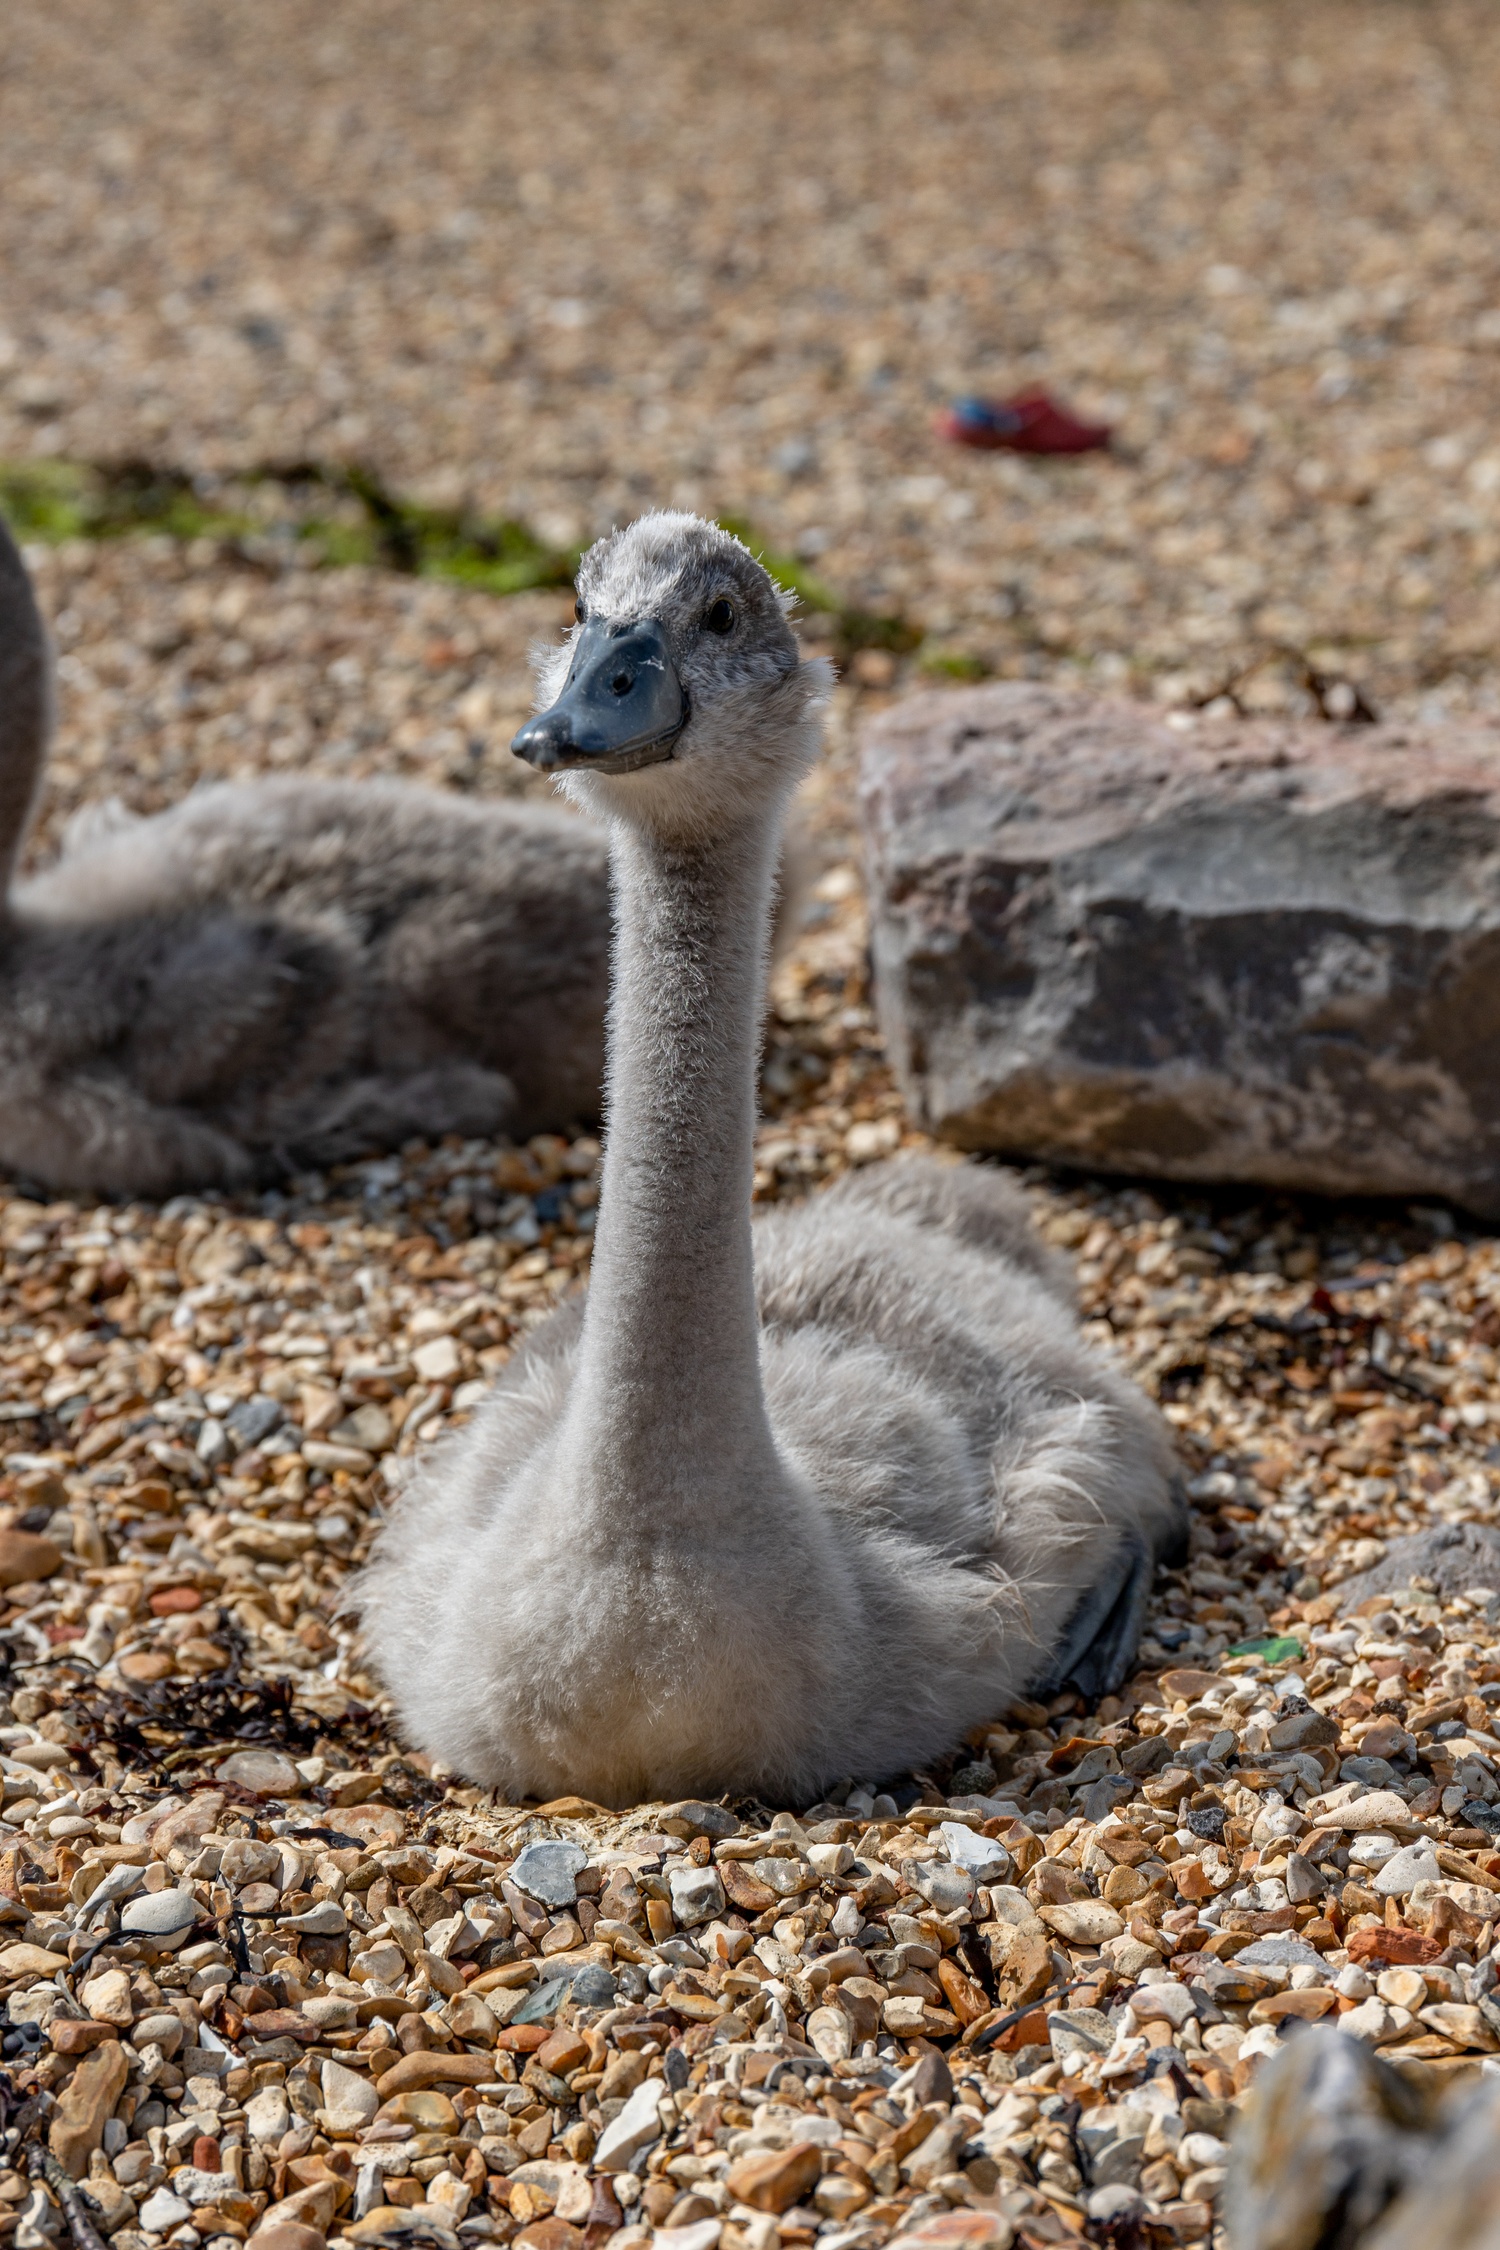 A cygnet sat on rocky beach looking to left of frame with another cygnet in the background